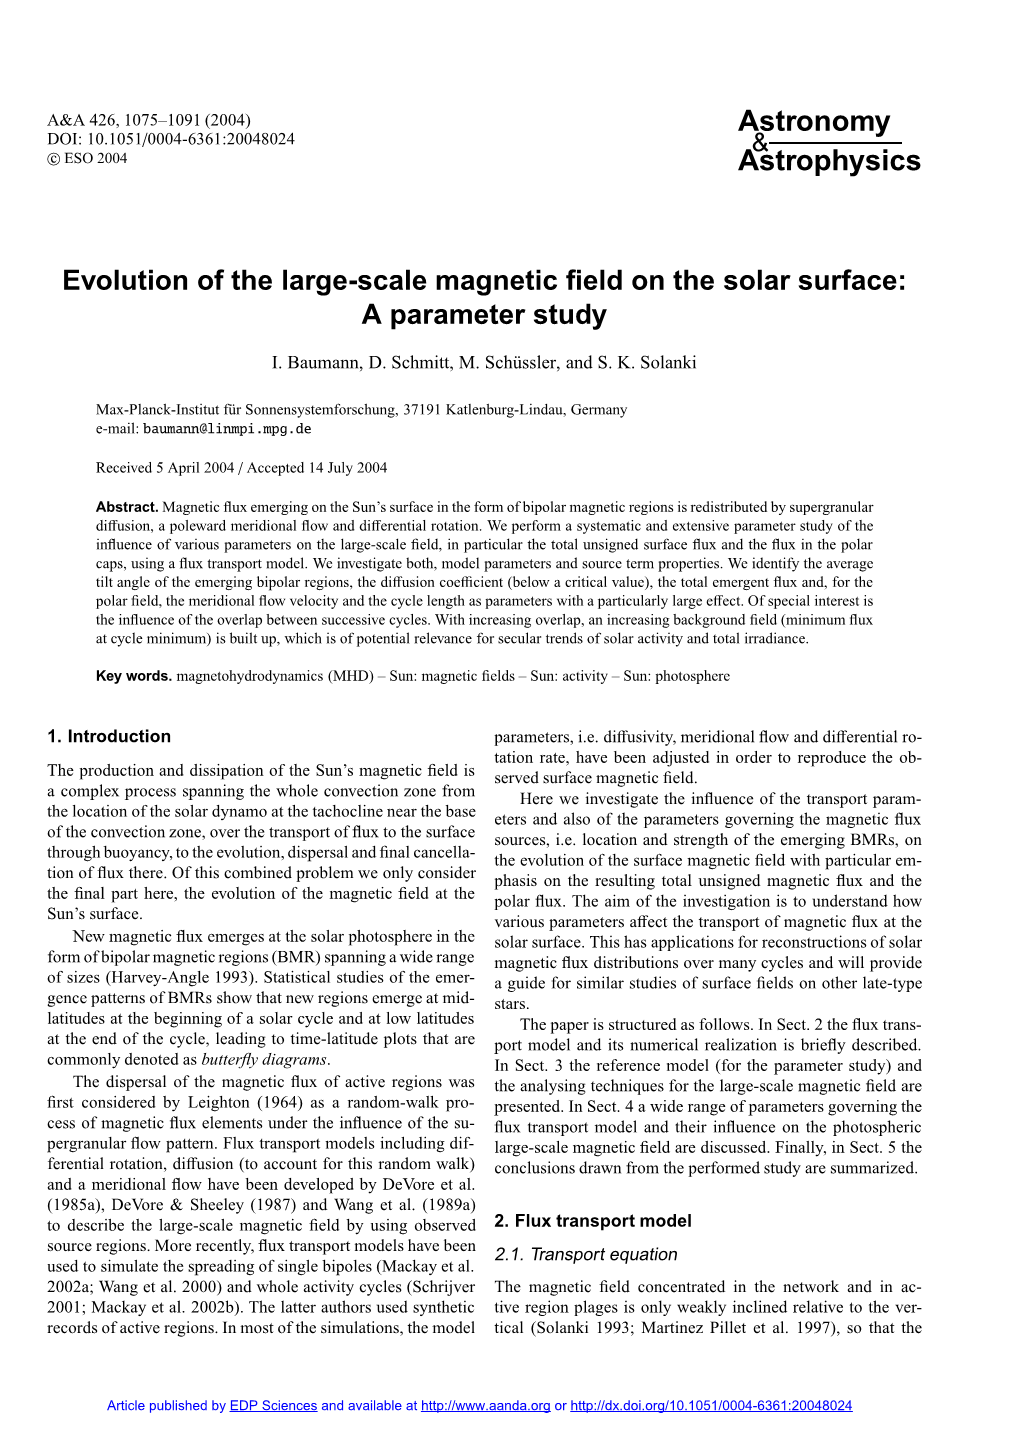 Evolution of the Large-Scale Magnetic Field on the Solar Surface